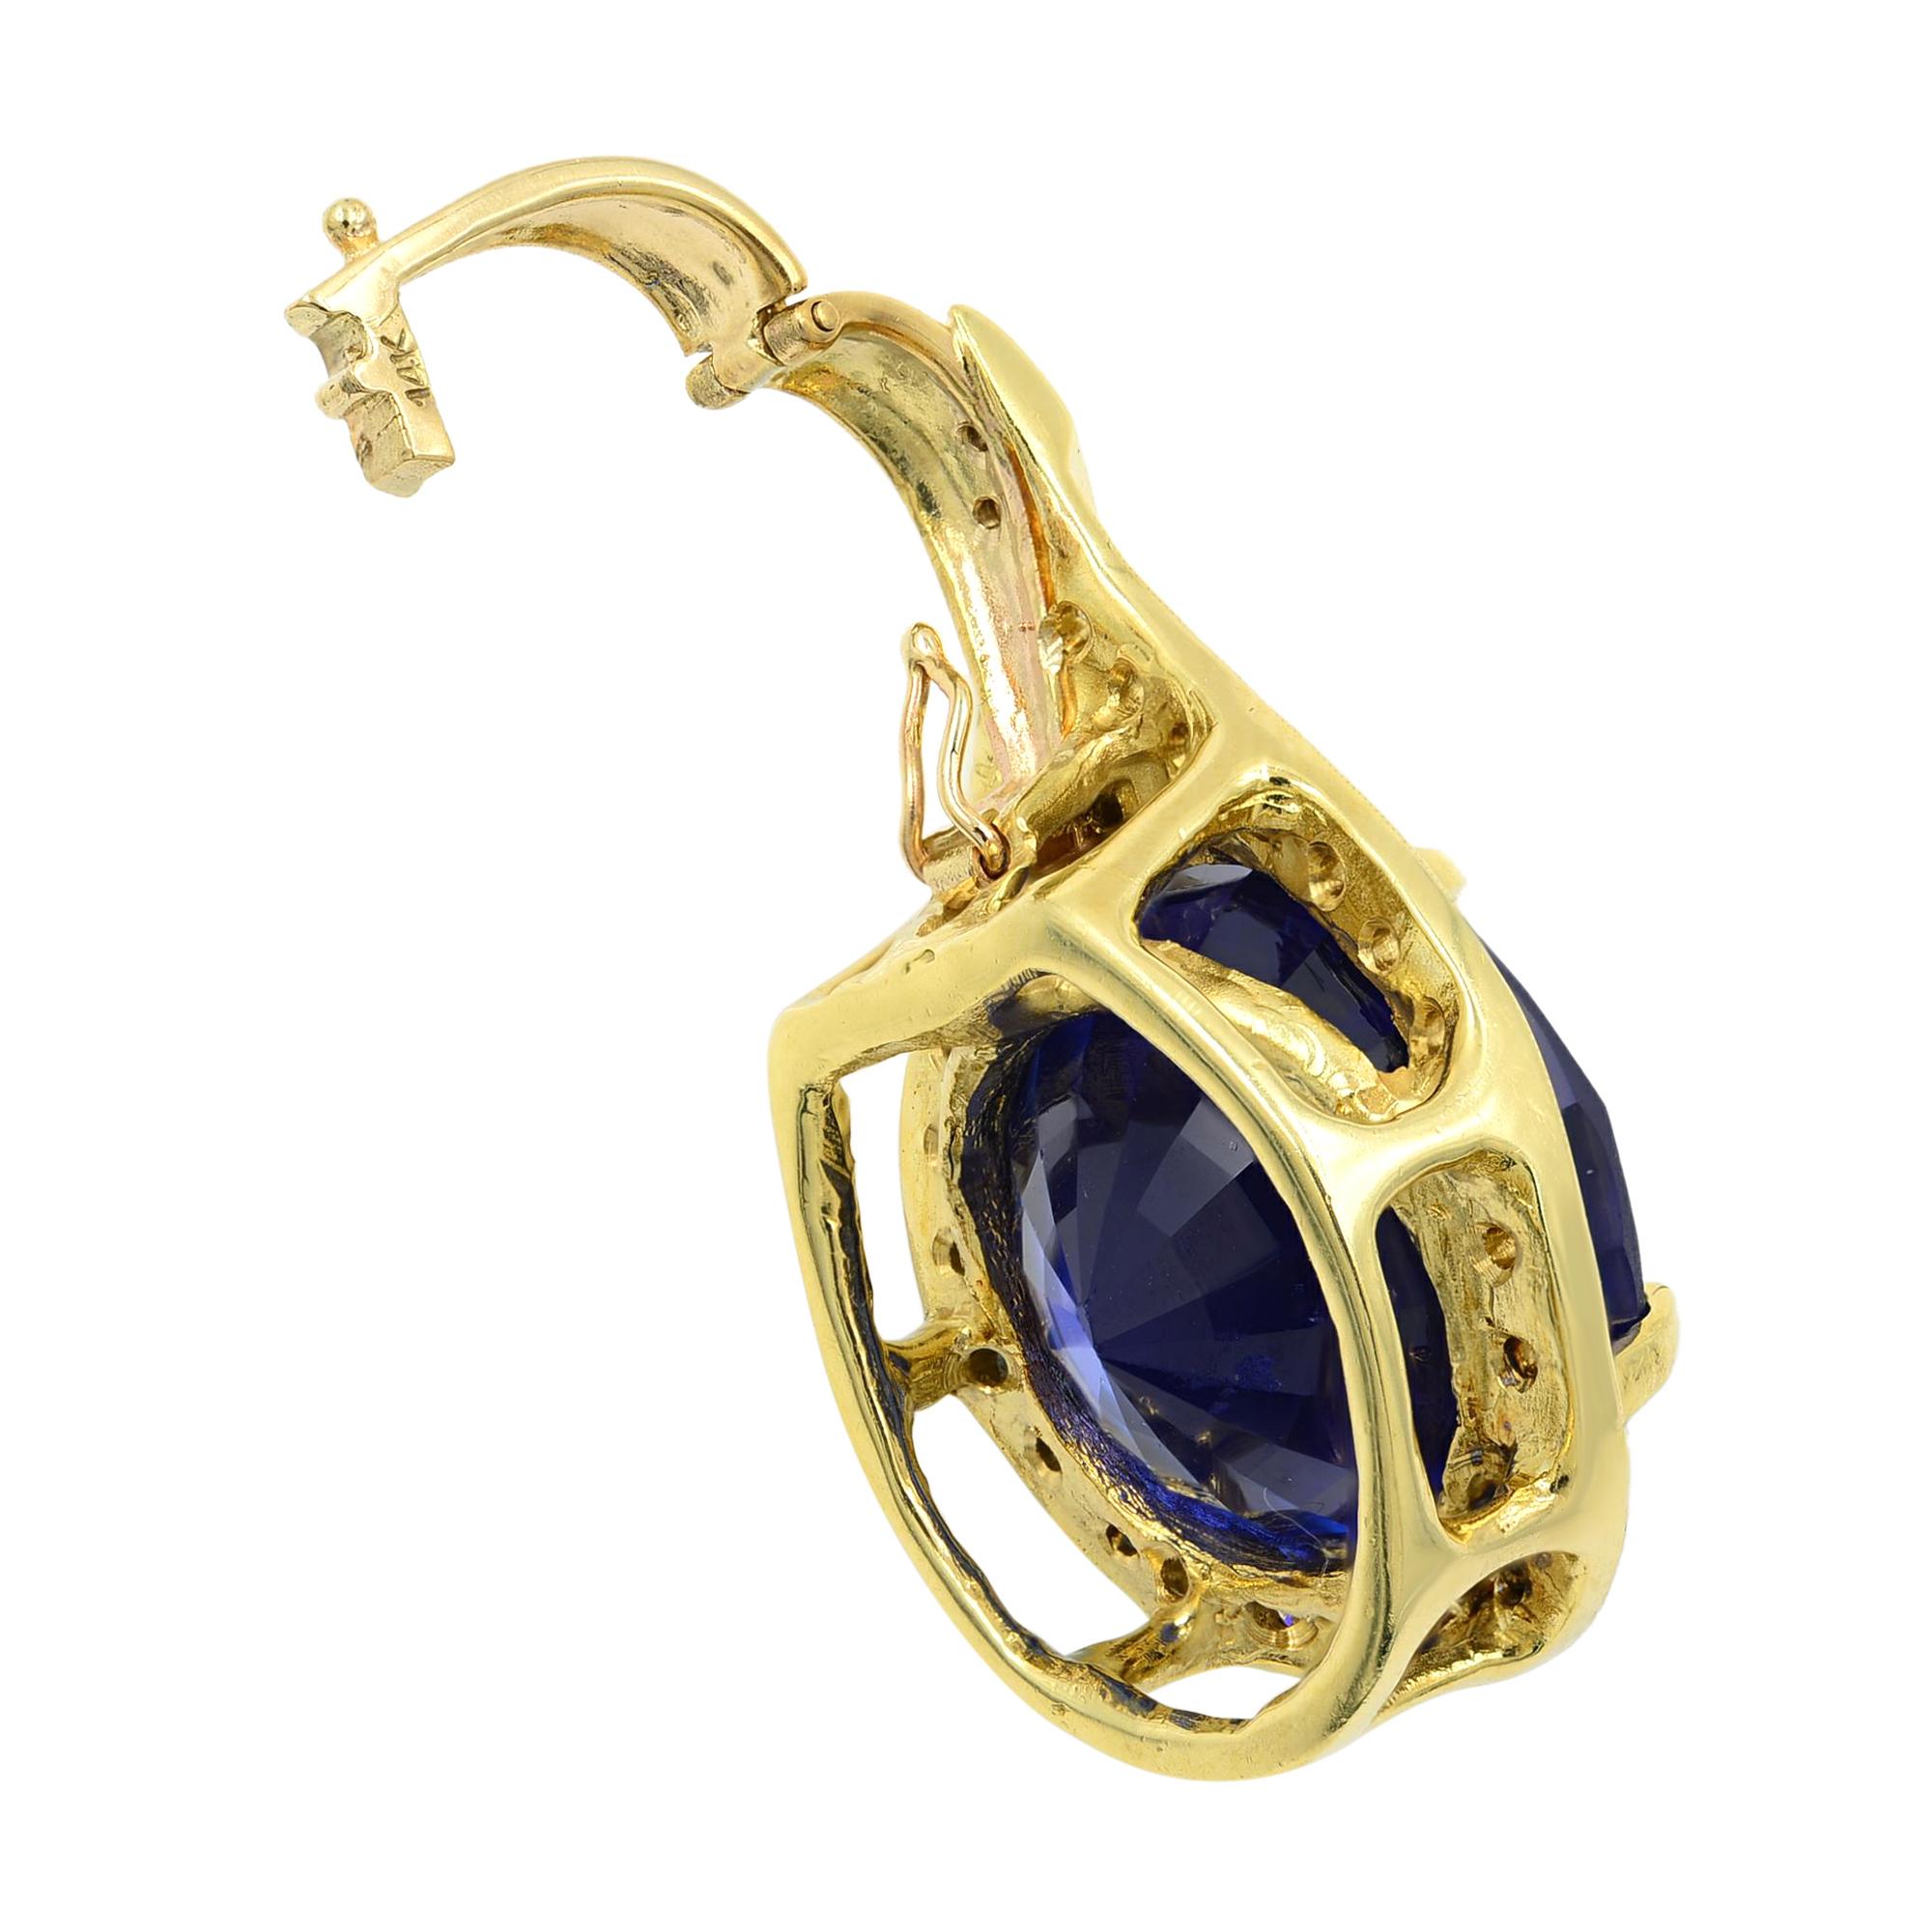 This knockout jewel astounds your senses with an extra-radiant, deep, rich blue color, oval cut Tanzanite - weighing 27.66 carats. The uniquely stunning and vibrant gemstone is surrounded by brilliant-cut diamonds set in 14k yellow gold. This